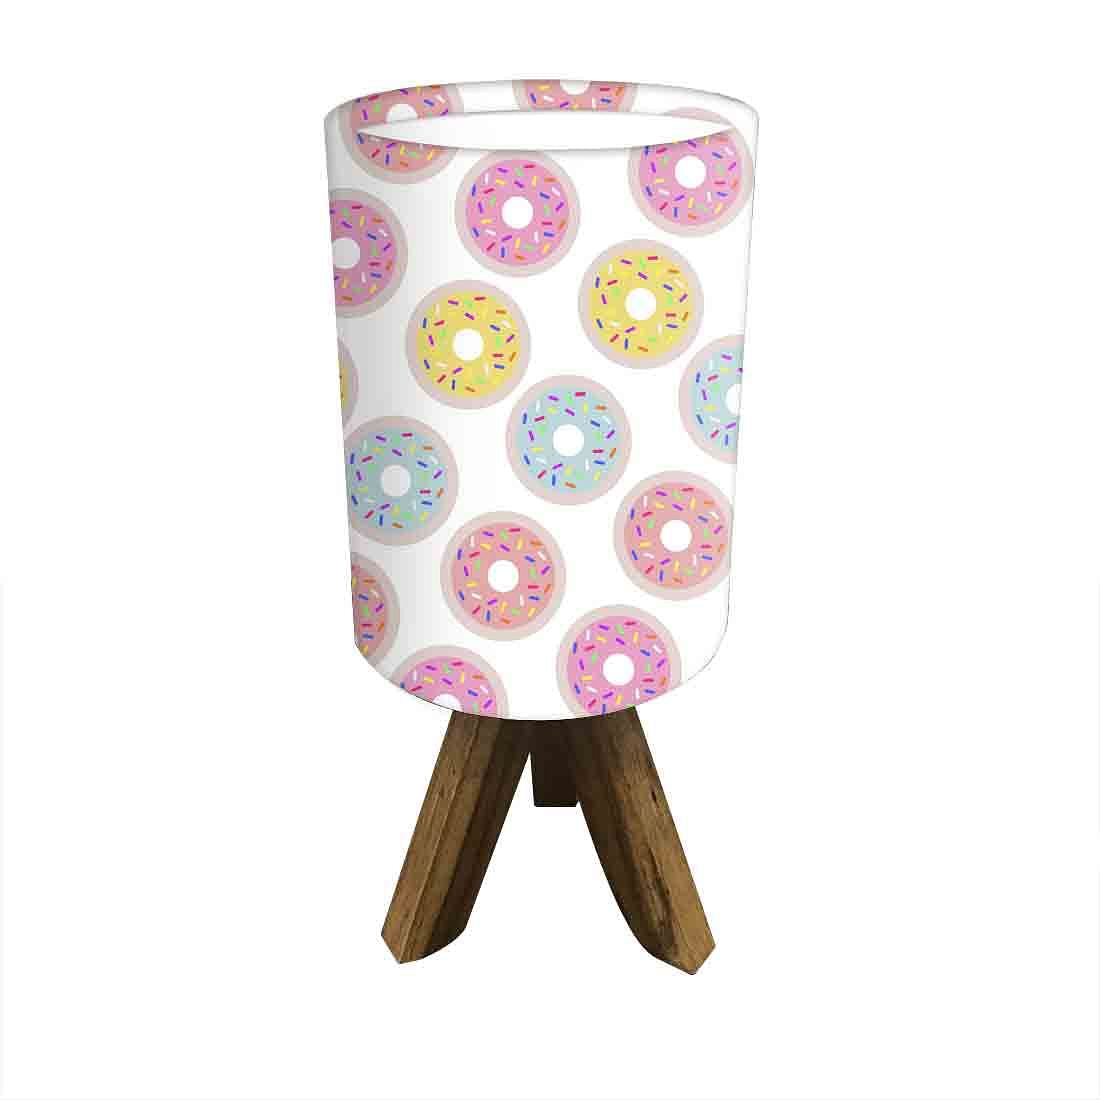 Wooden Side Lamps For Bedroom - Colorful Donuts Nutcase